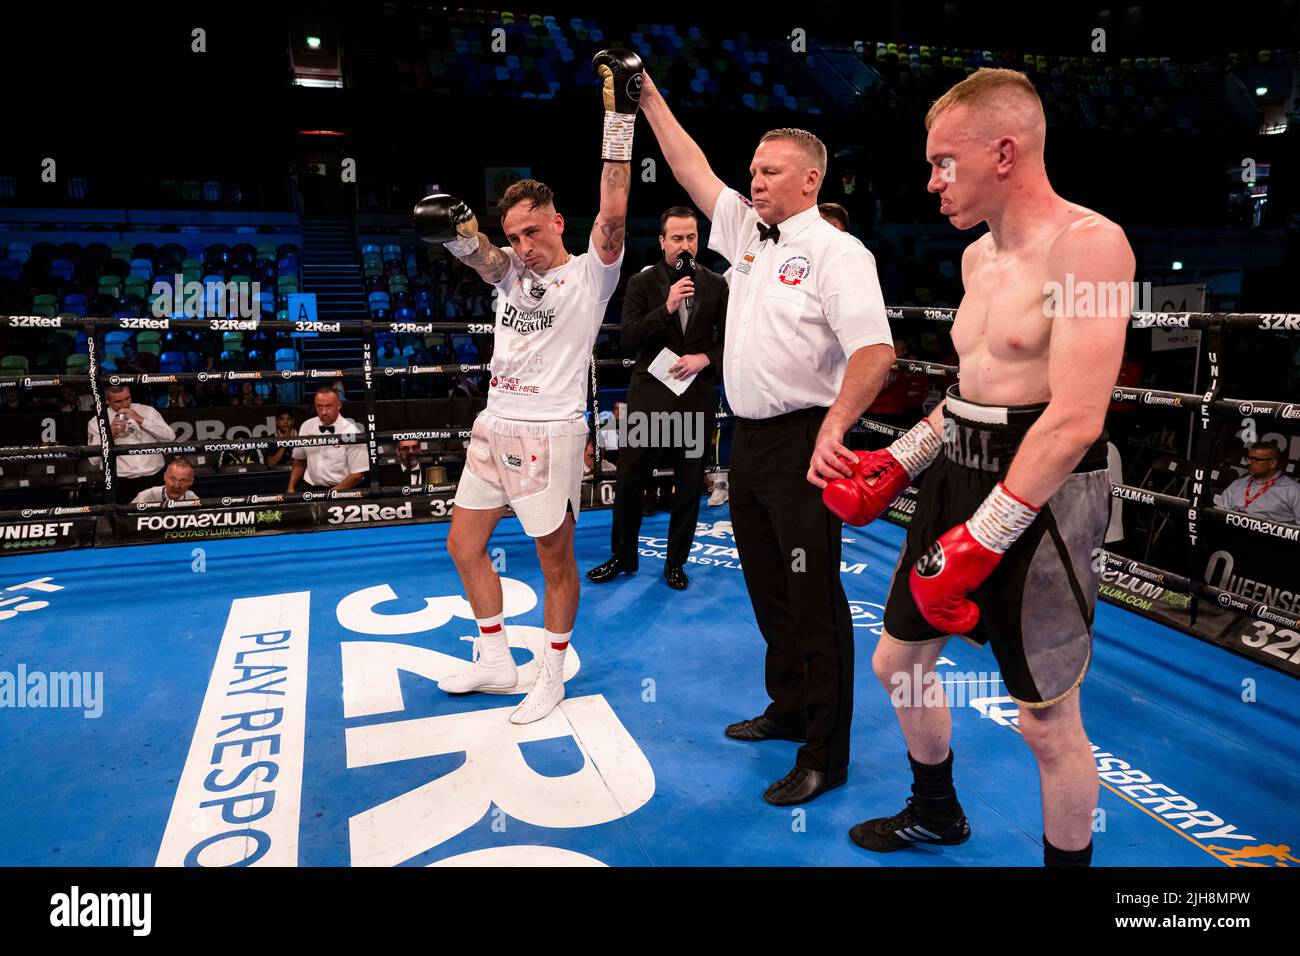 LONDON, UNITED KINGDOM. 16th Jul, 2022. Sean Noakes vs MJ Hall – Welterweight Contest during under fight card of Frankwarren presents Sheeraz vs Torres - WBC Silver Middleweight Championship at Copper Box Arena on Saturday, July 16, 2022 in LONDON UNITED KINGDOM. Credit: Taka G Wu/Alamy Live News Stock Photo